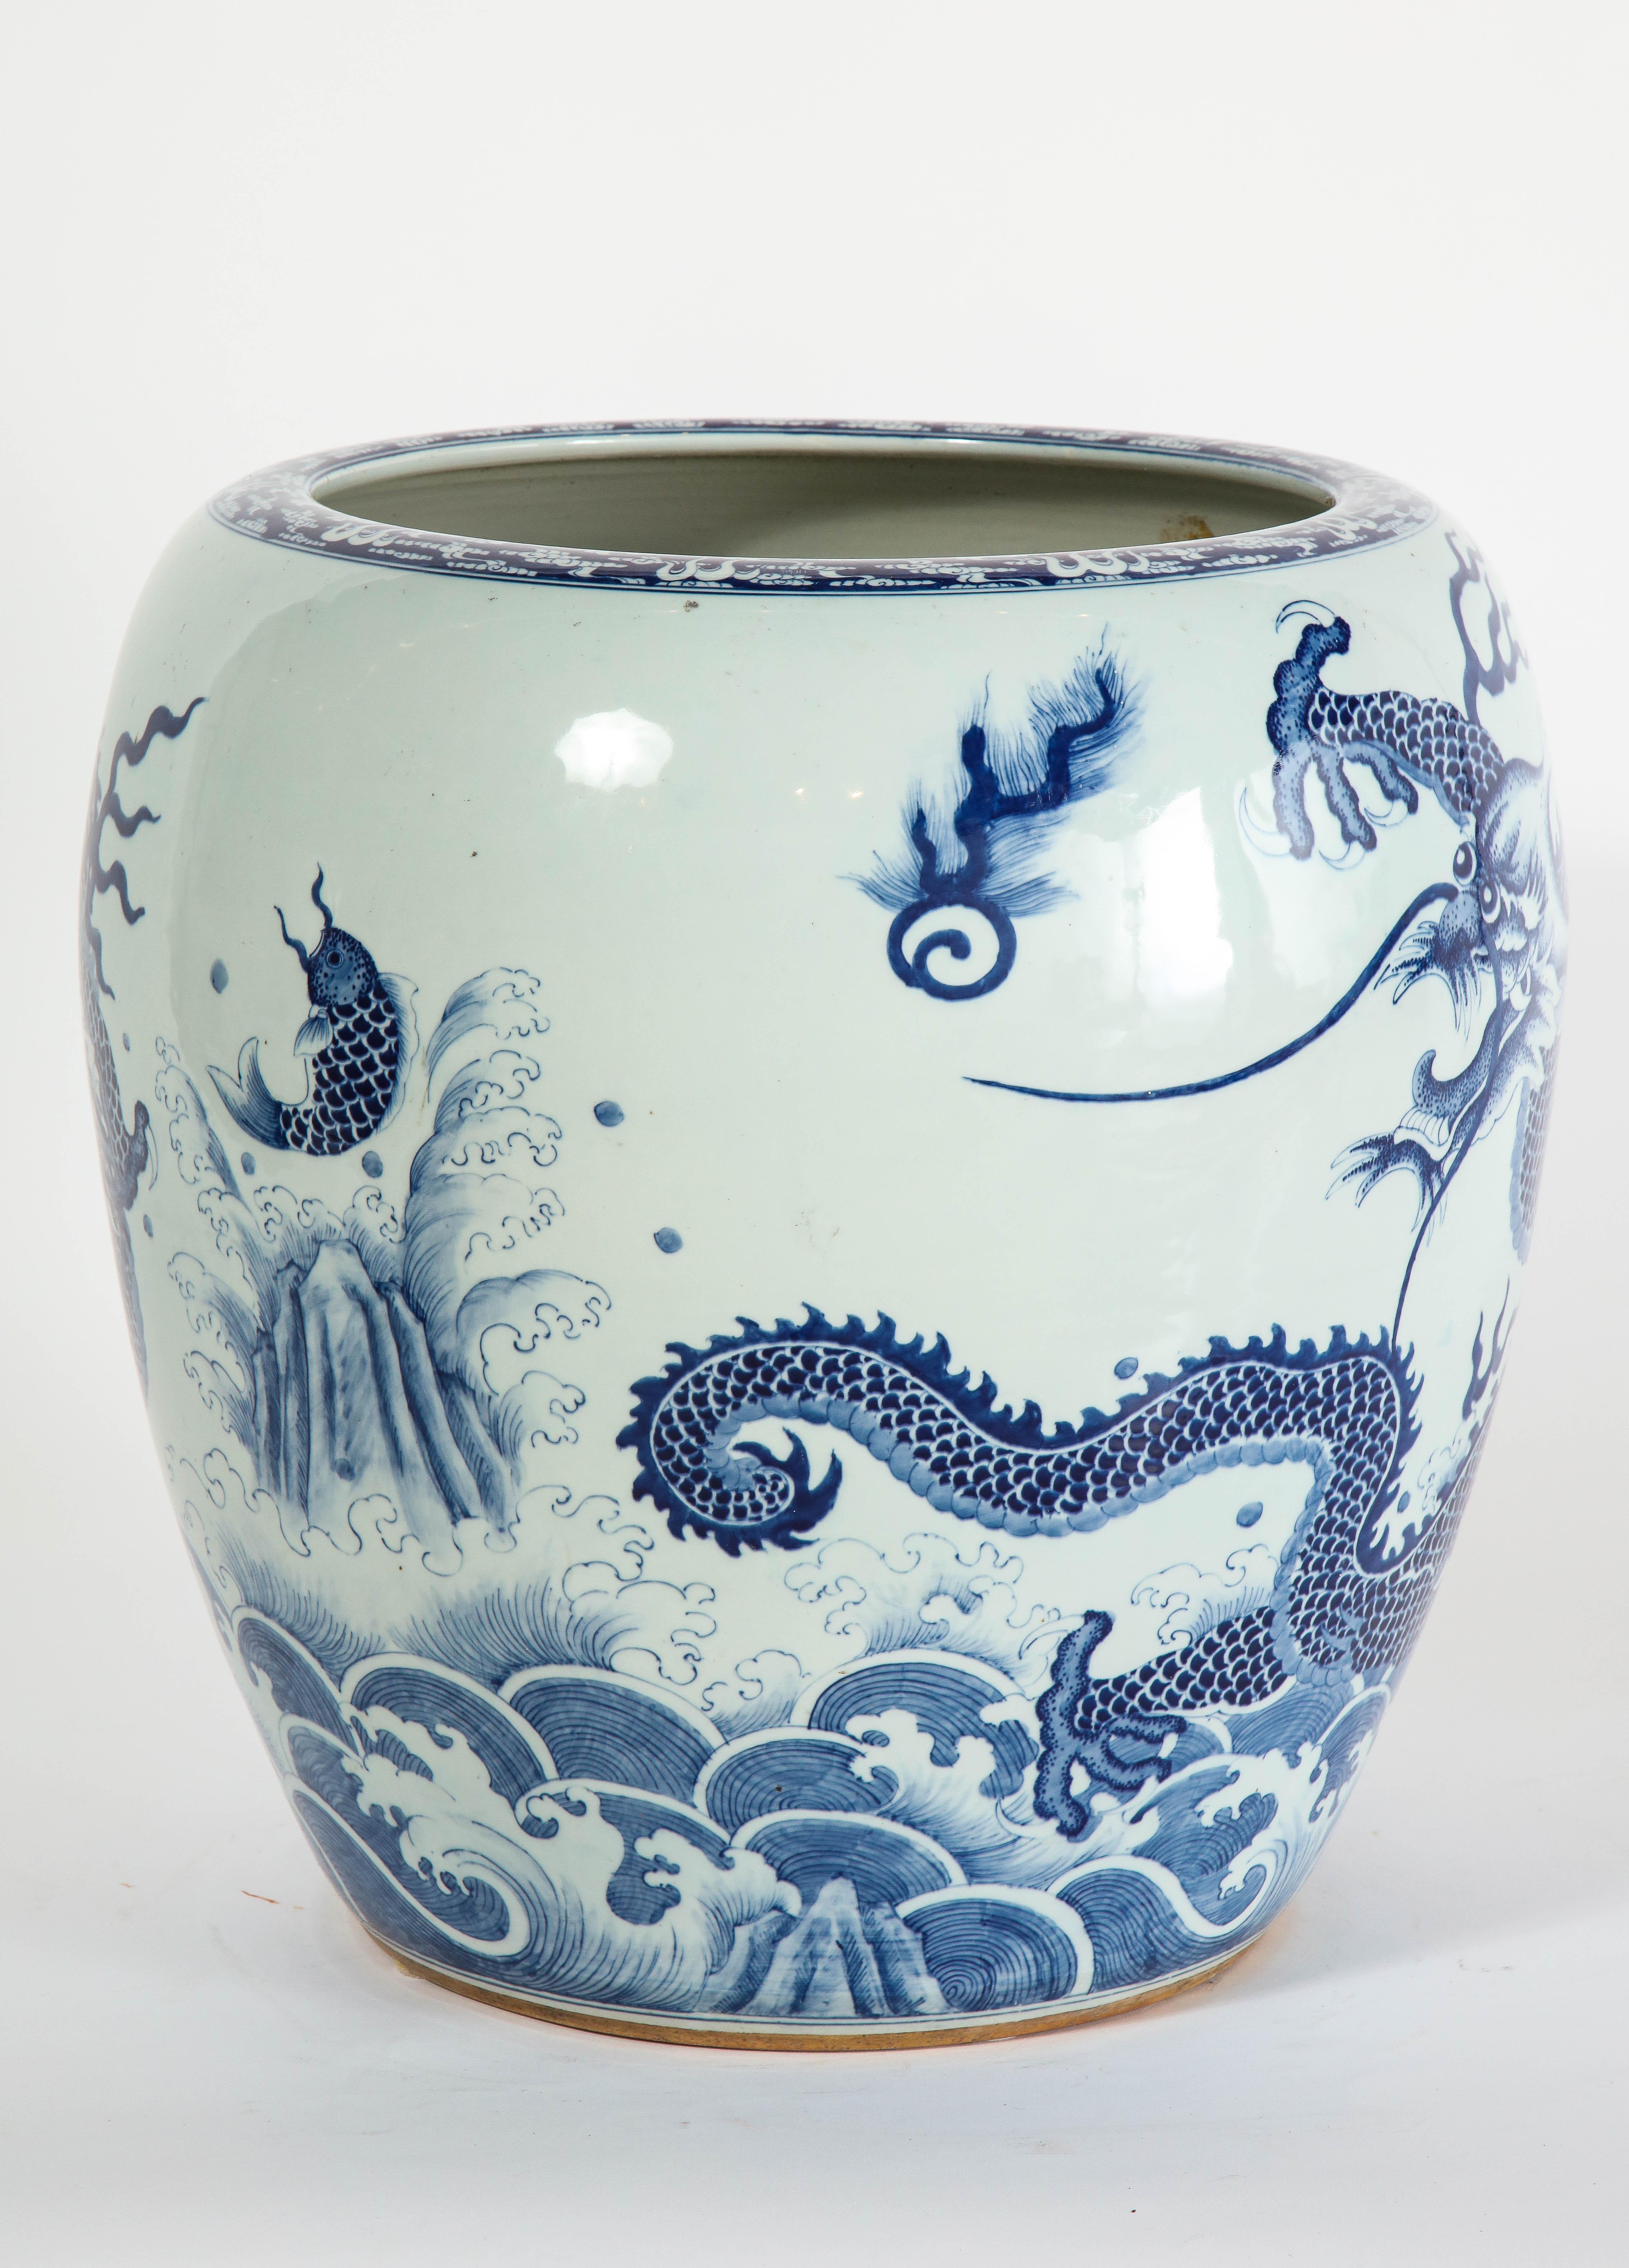 A fantastic and large mid-1800s Chinese blue and white four-claw dragon and Koi fish design jardinière or planter. This is a truly elaborately designed jardiniere, with a gorgeous four-claw dragon flowing through the clouds with a beautiful koi fish